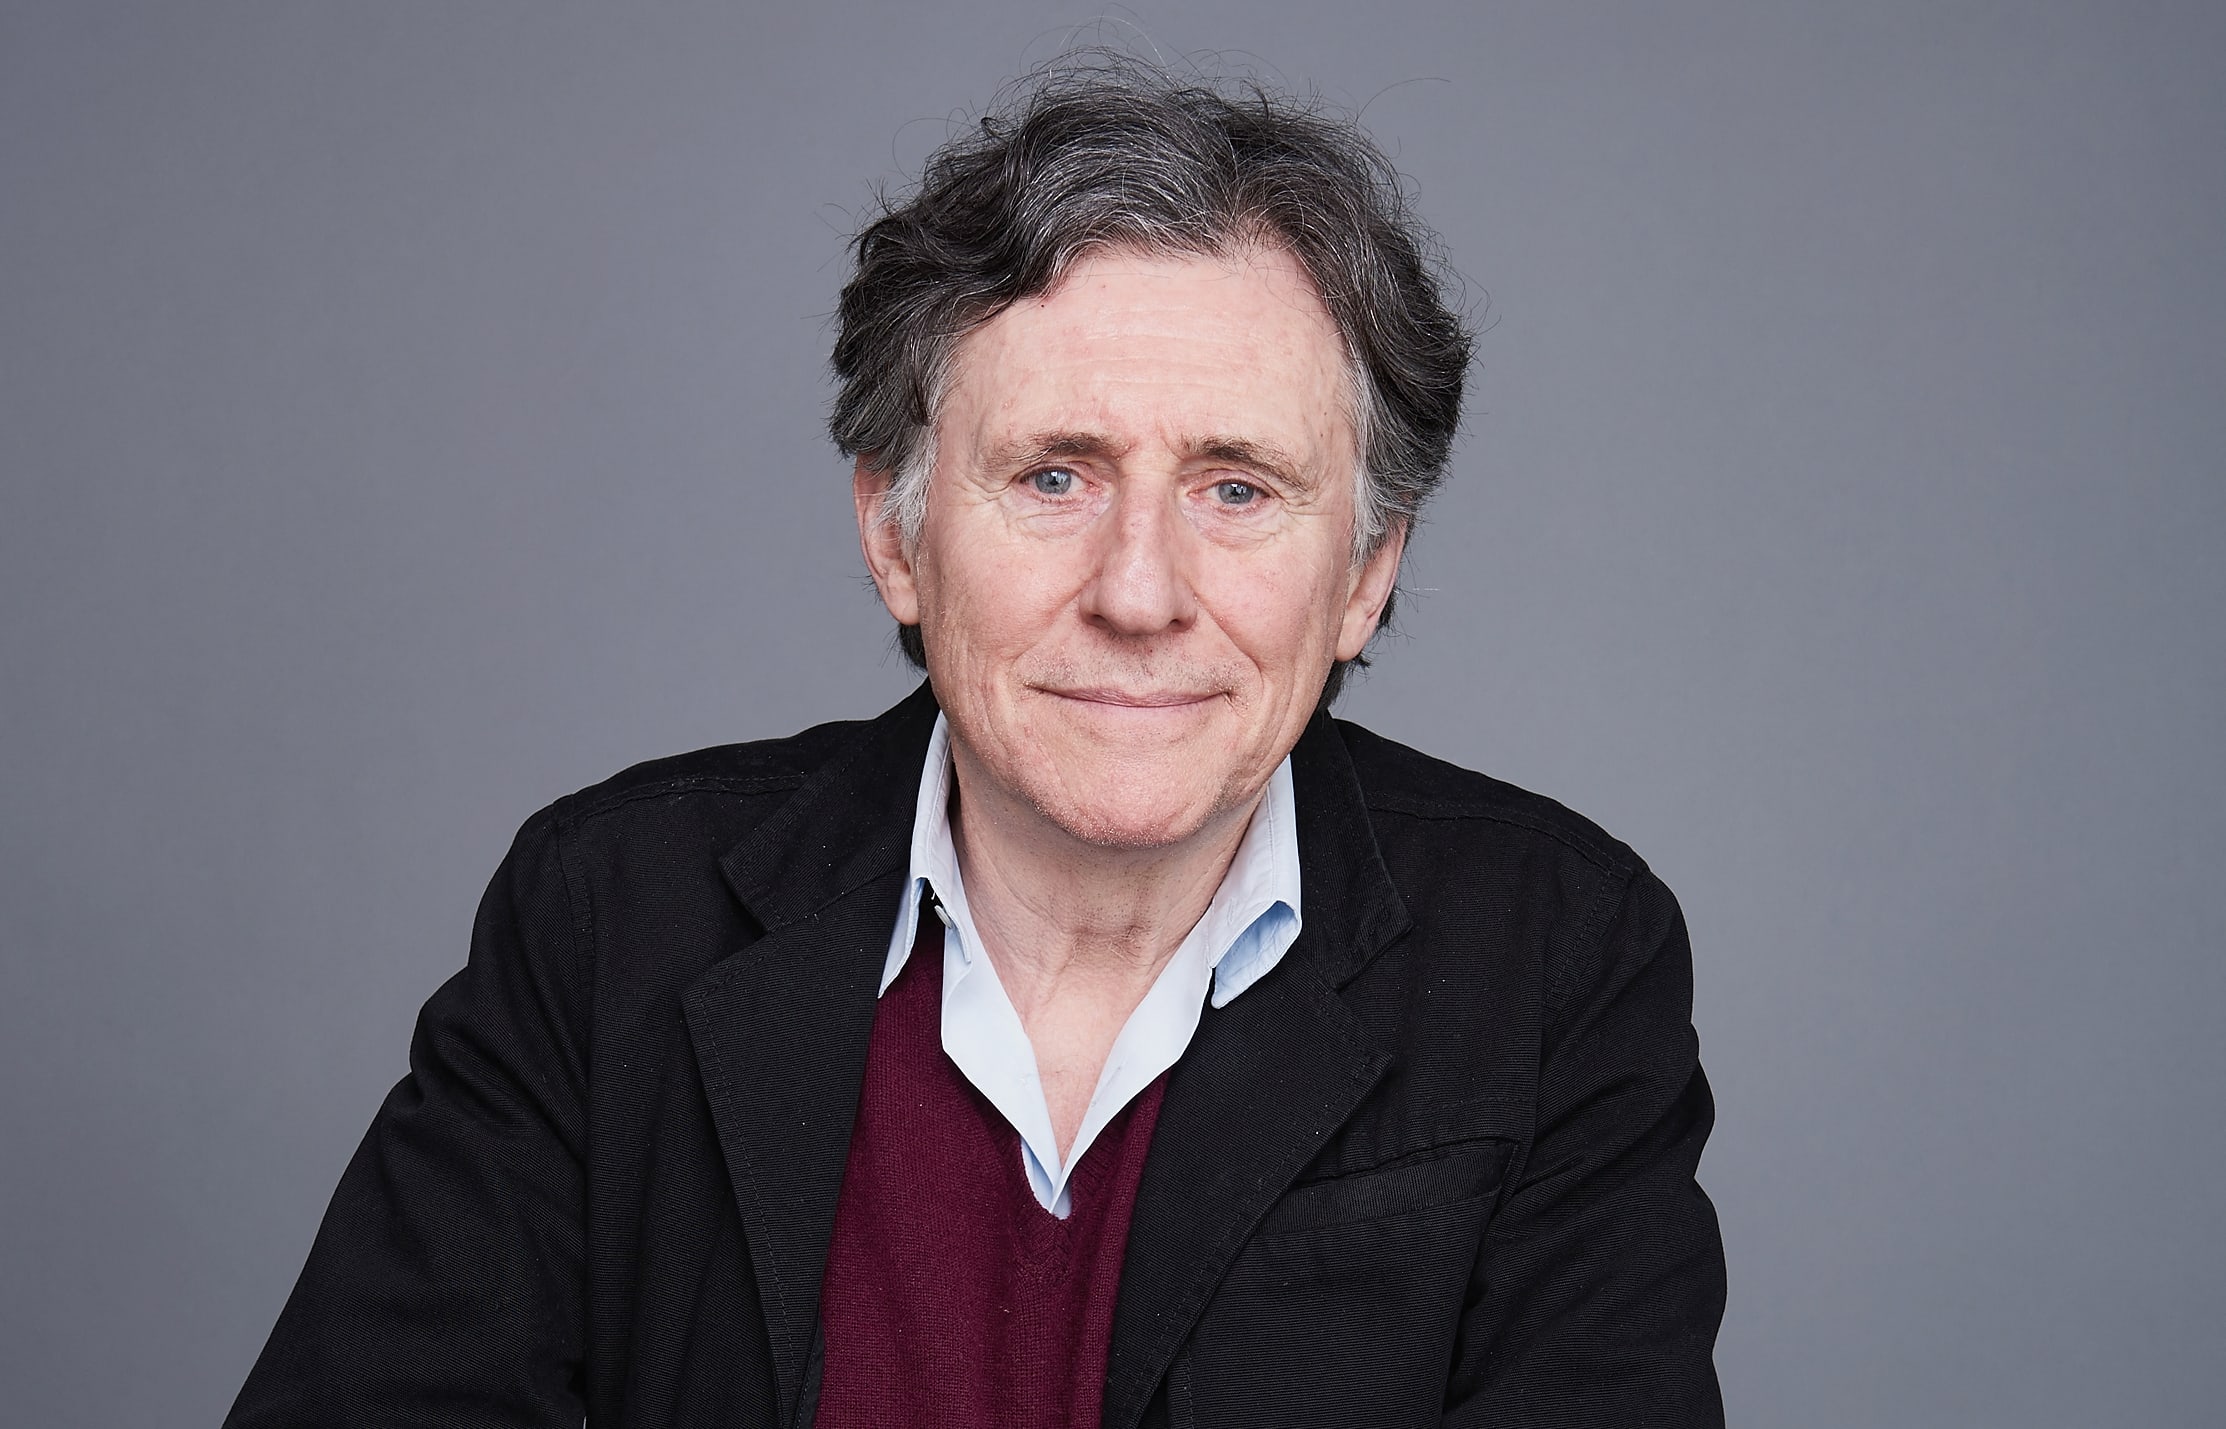 Actor Gabriel Byrne poses for a portrait at the 2016 Tony Awards Meet The Nominees Press Reception on May 4, 2016 in New York City.